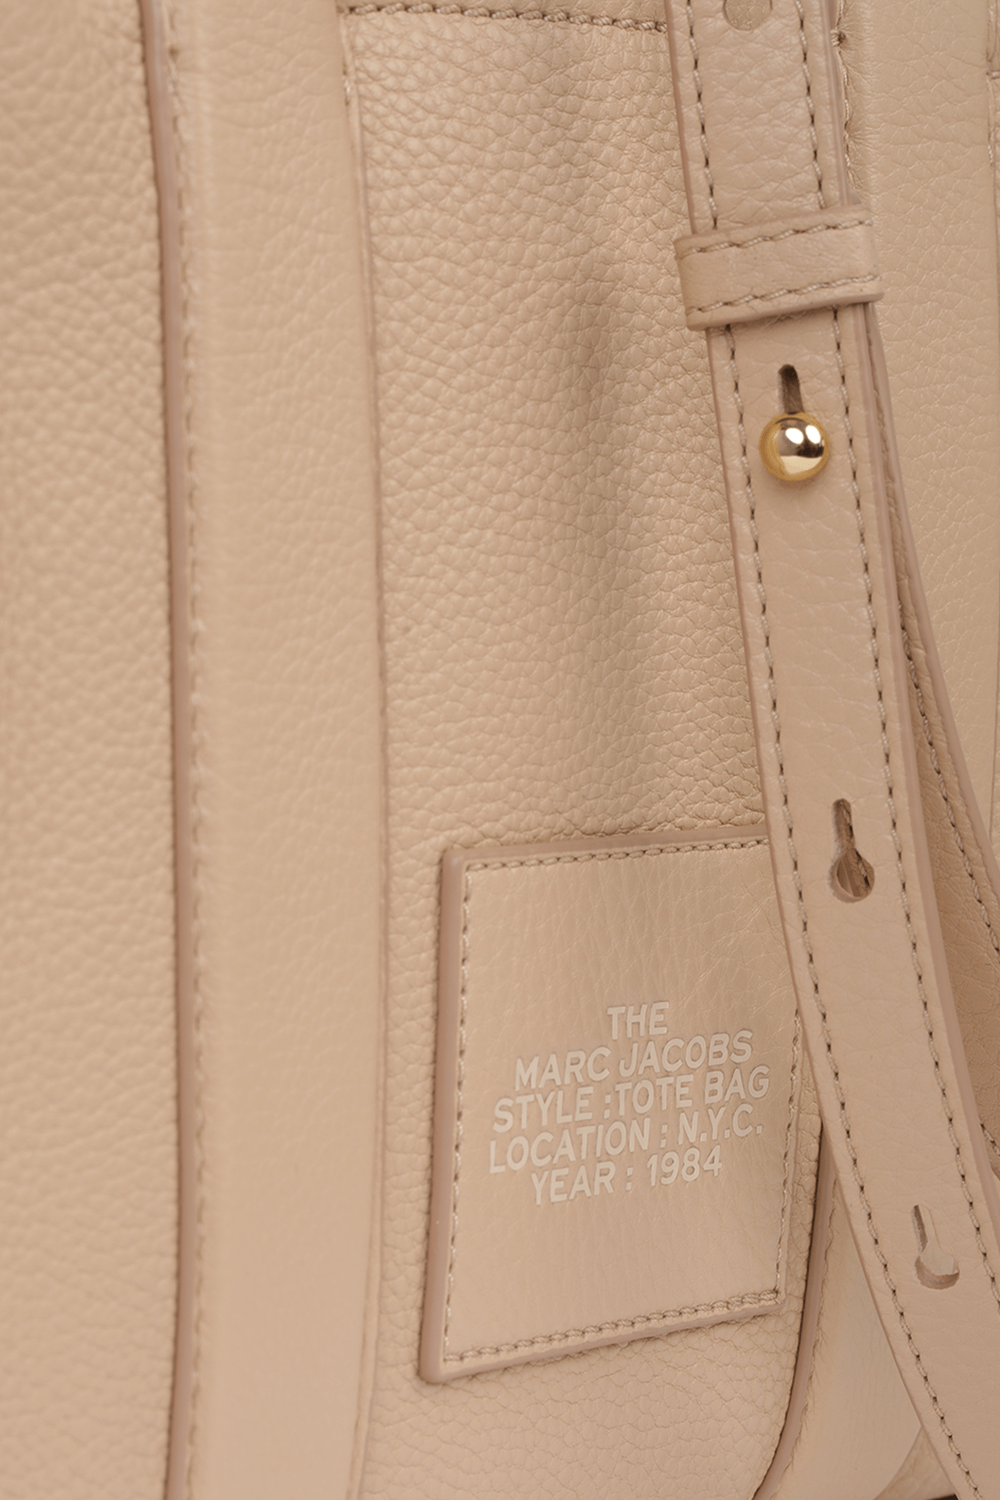 The Leather Mini Traveler Tote Bag in Light Beige MARC JACOBS